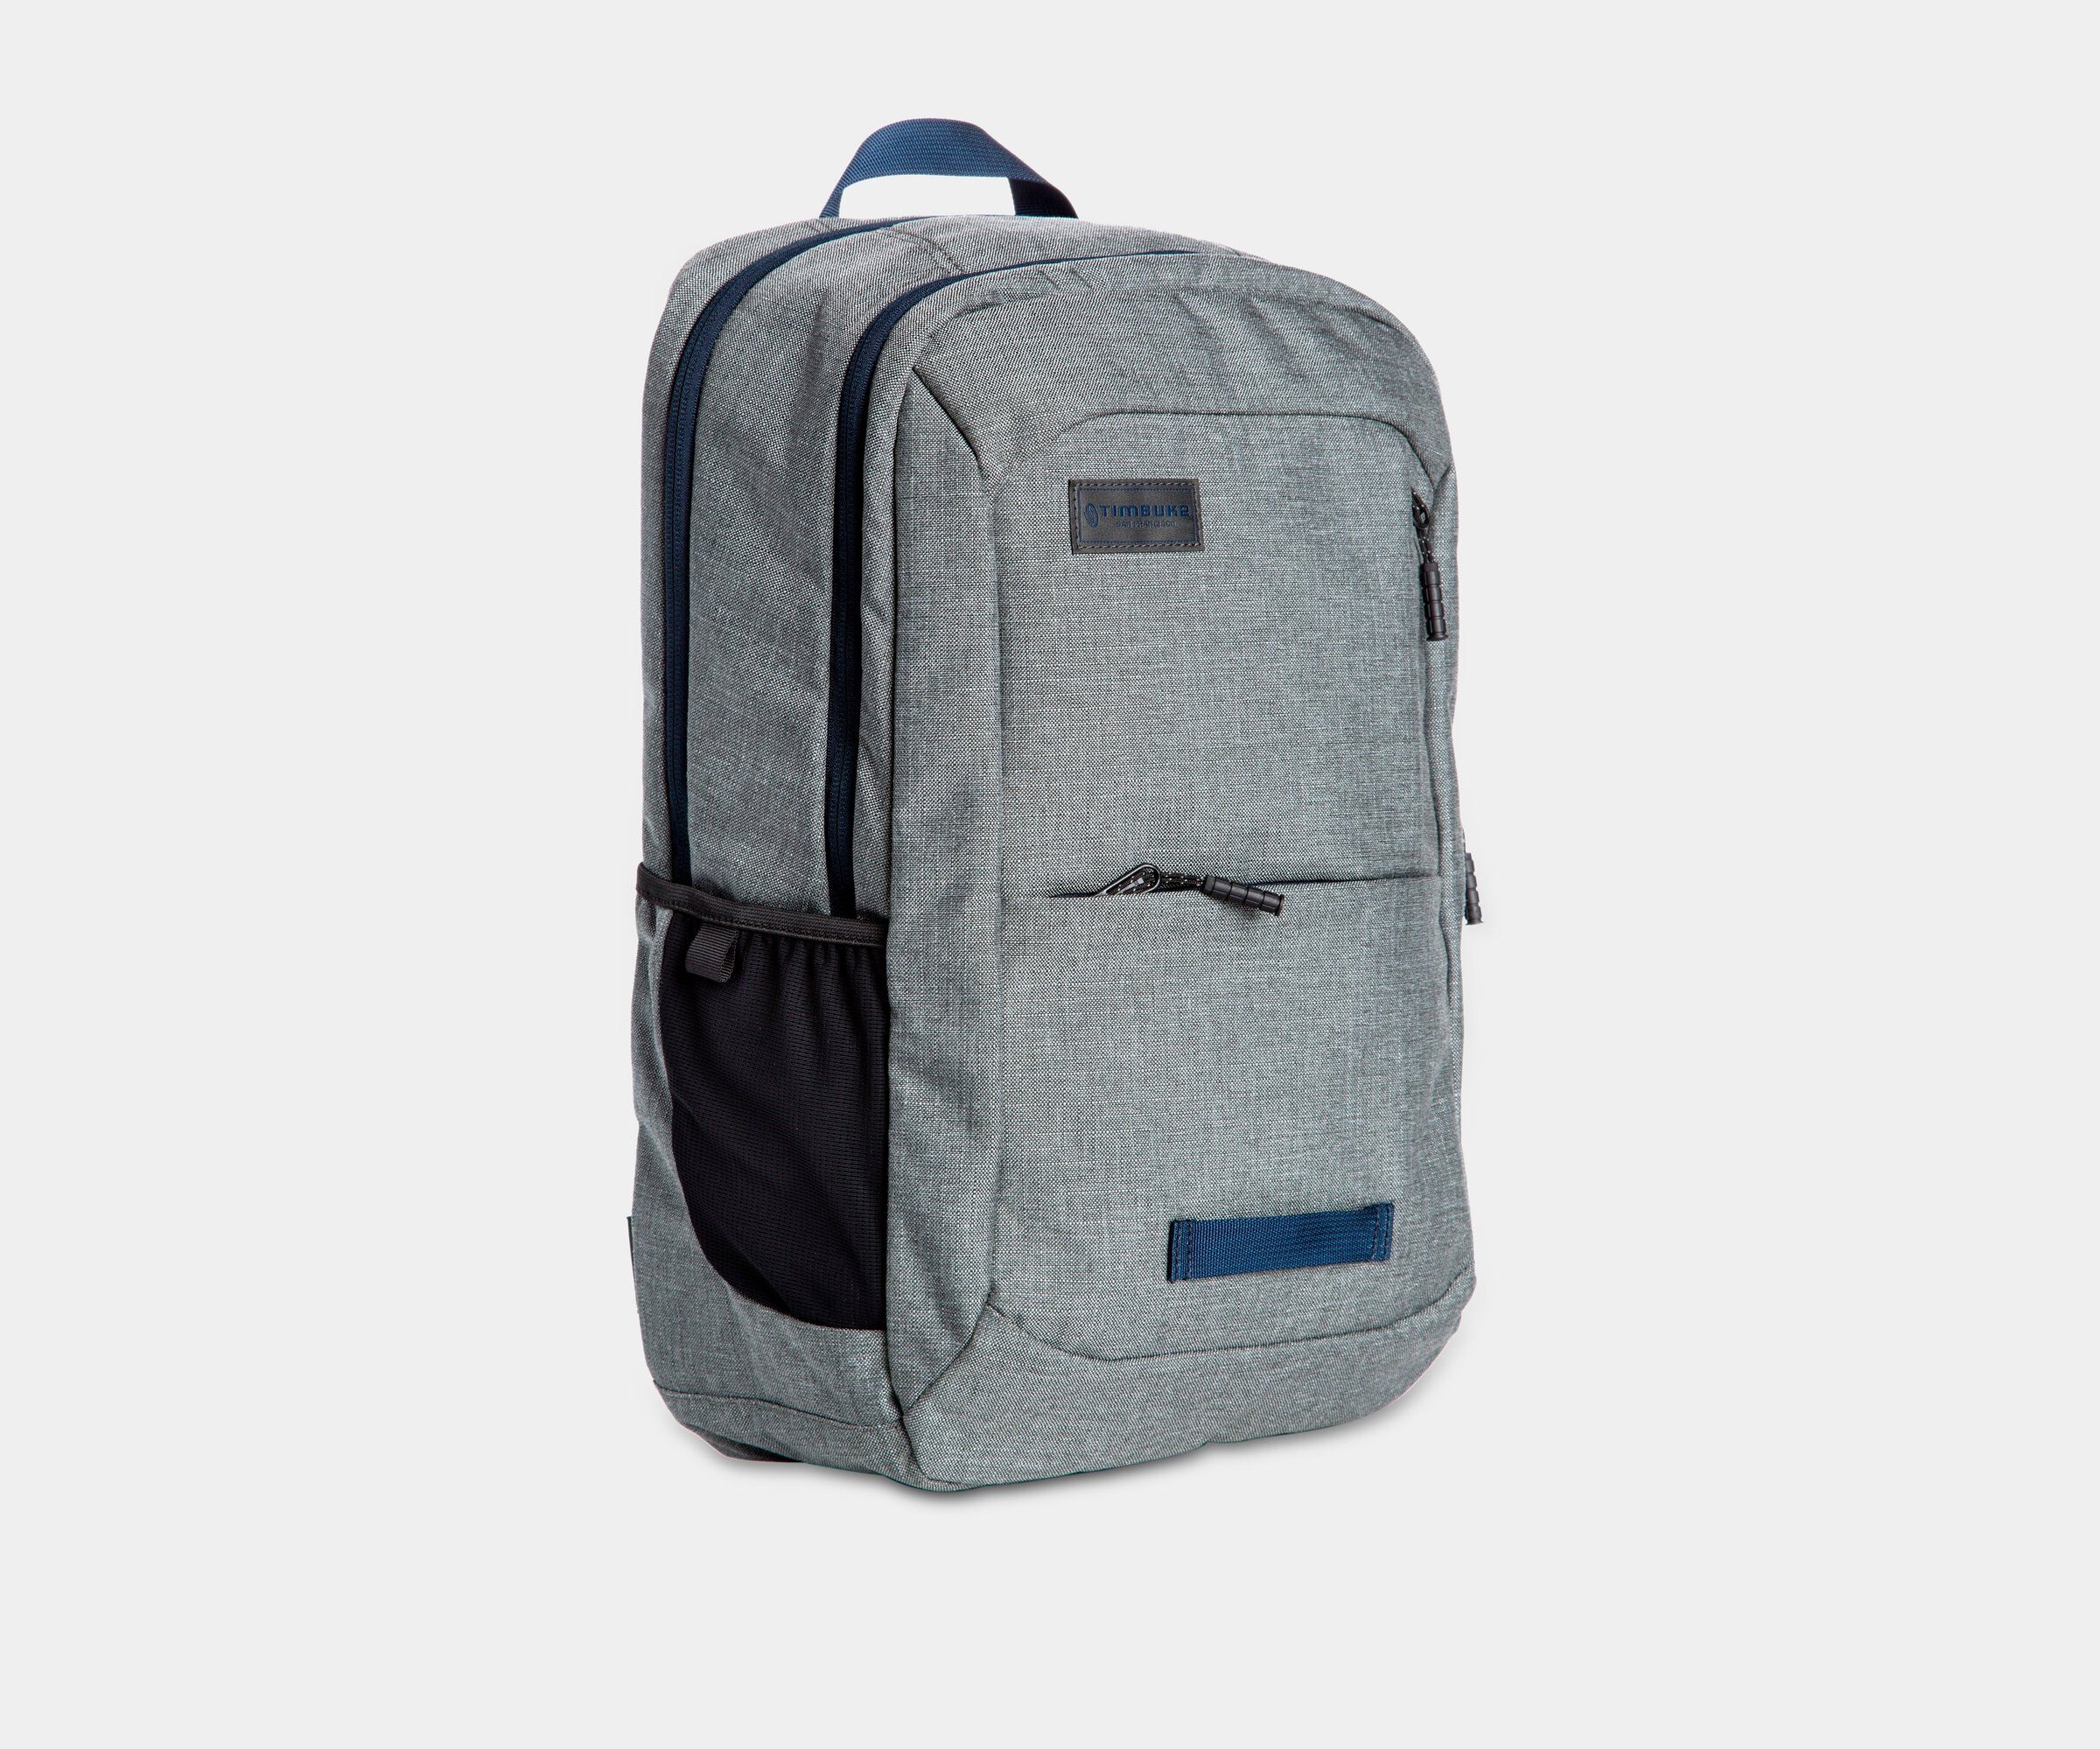 Custom Branded Timbuk2 Bags - Midway